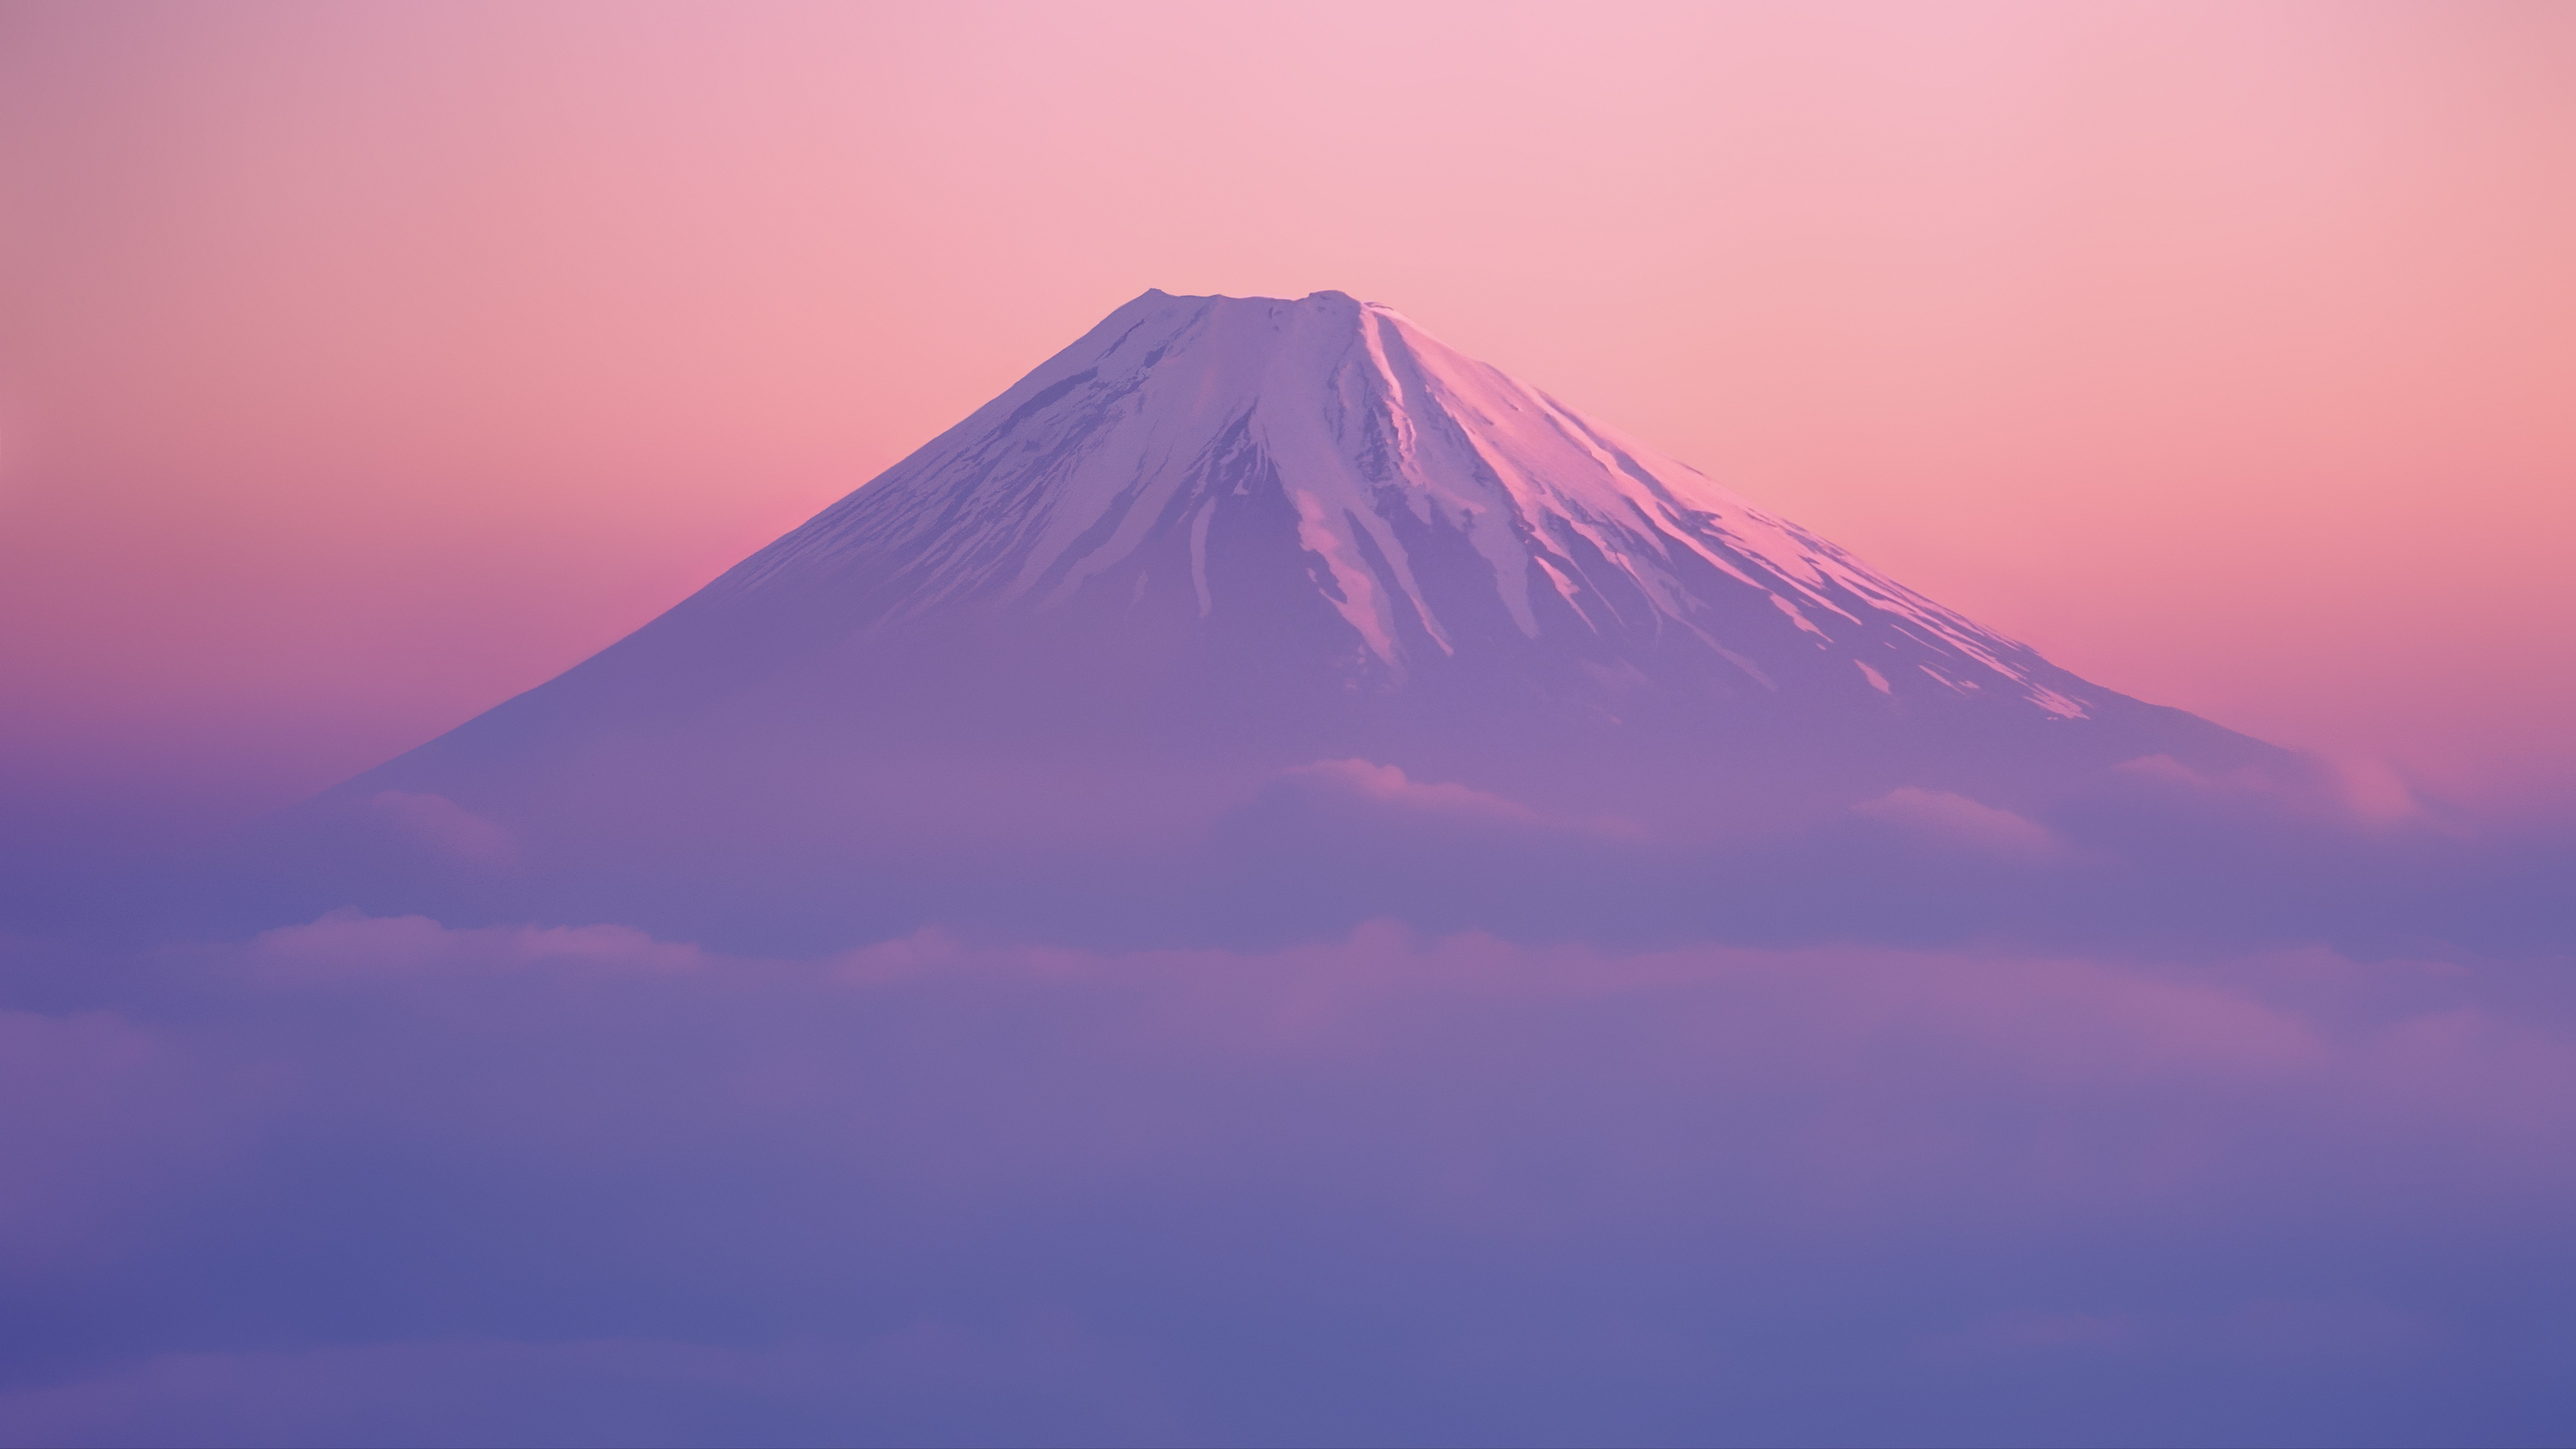 Mount Fuji Clouds And Mountains Japan Wallpapers